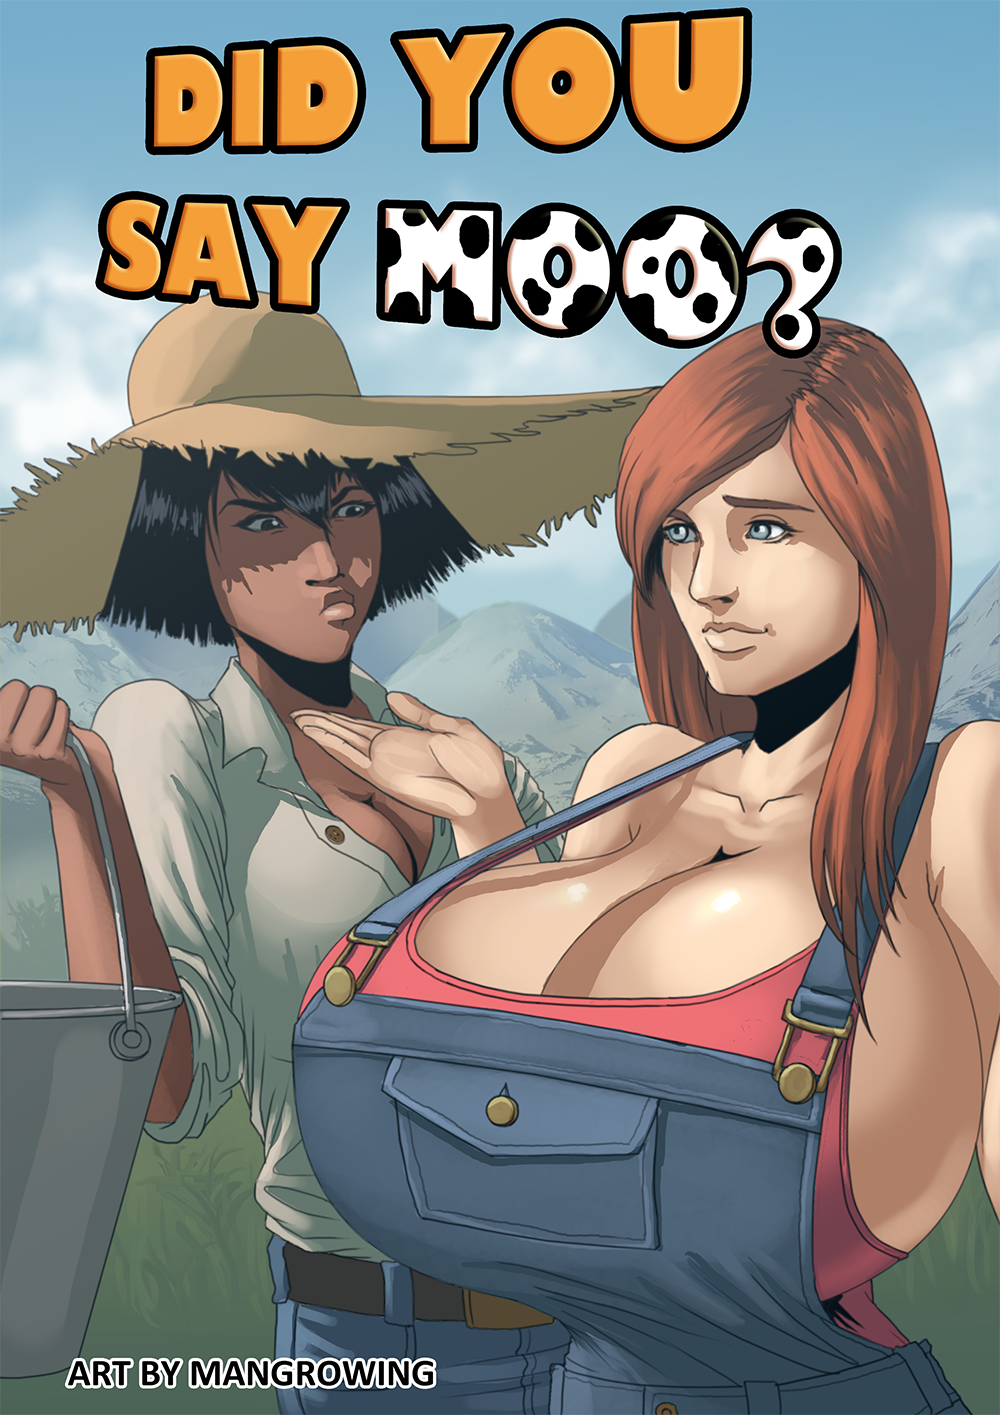 Breast Expansion Fetish With Farm Girl In Mangrowing Did You Say Moo Cartoon Porn